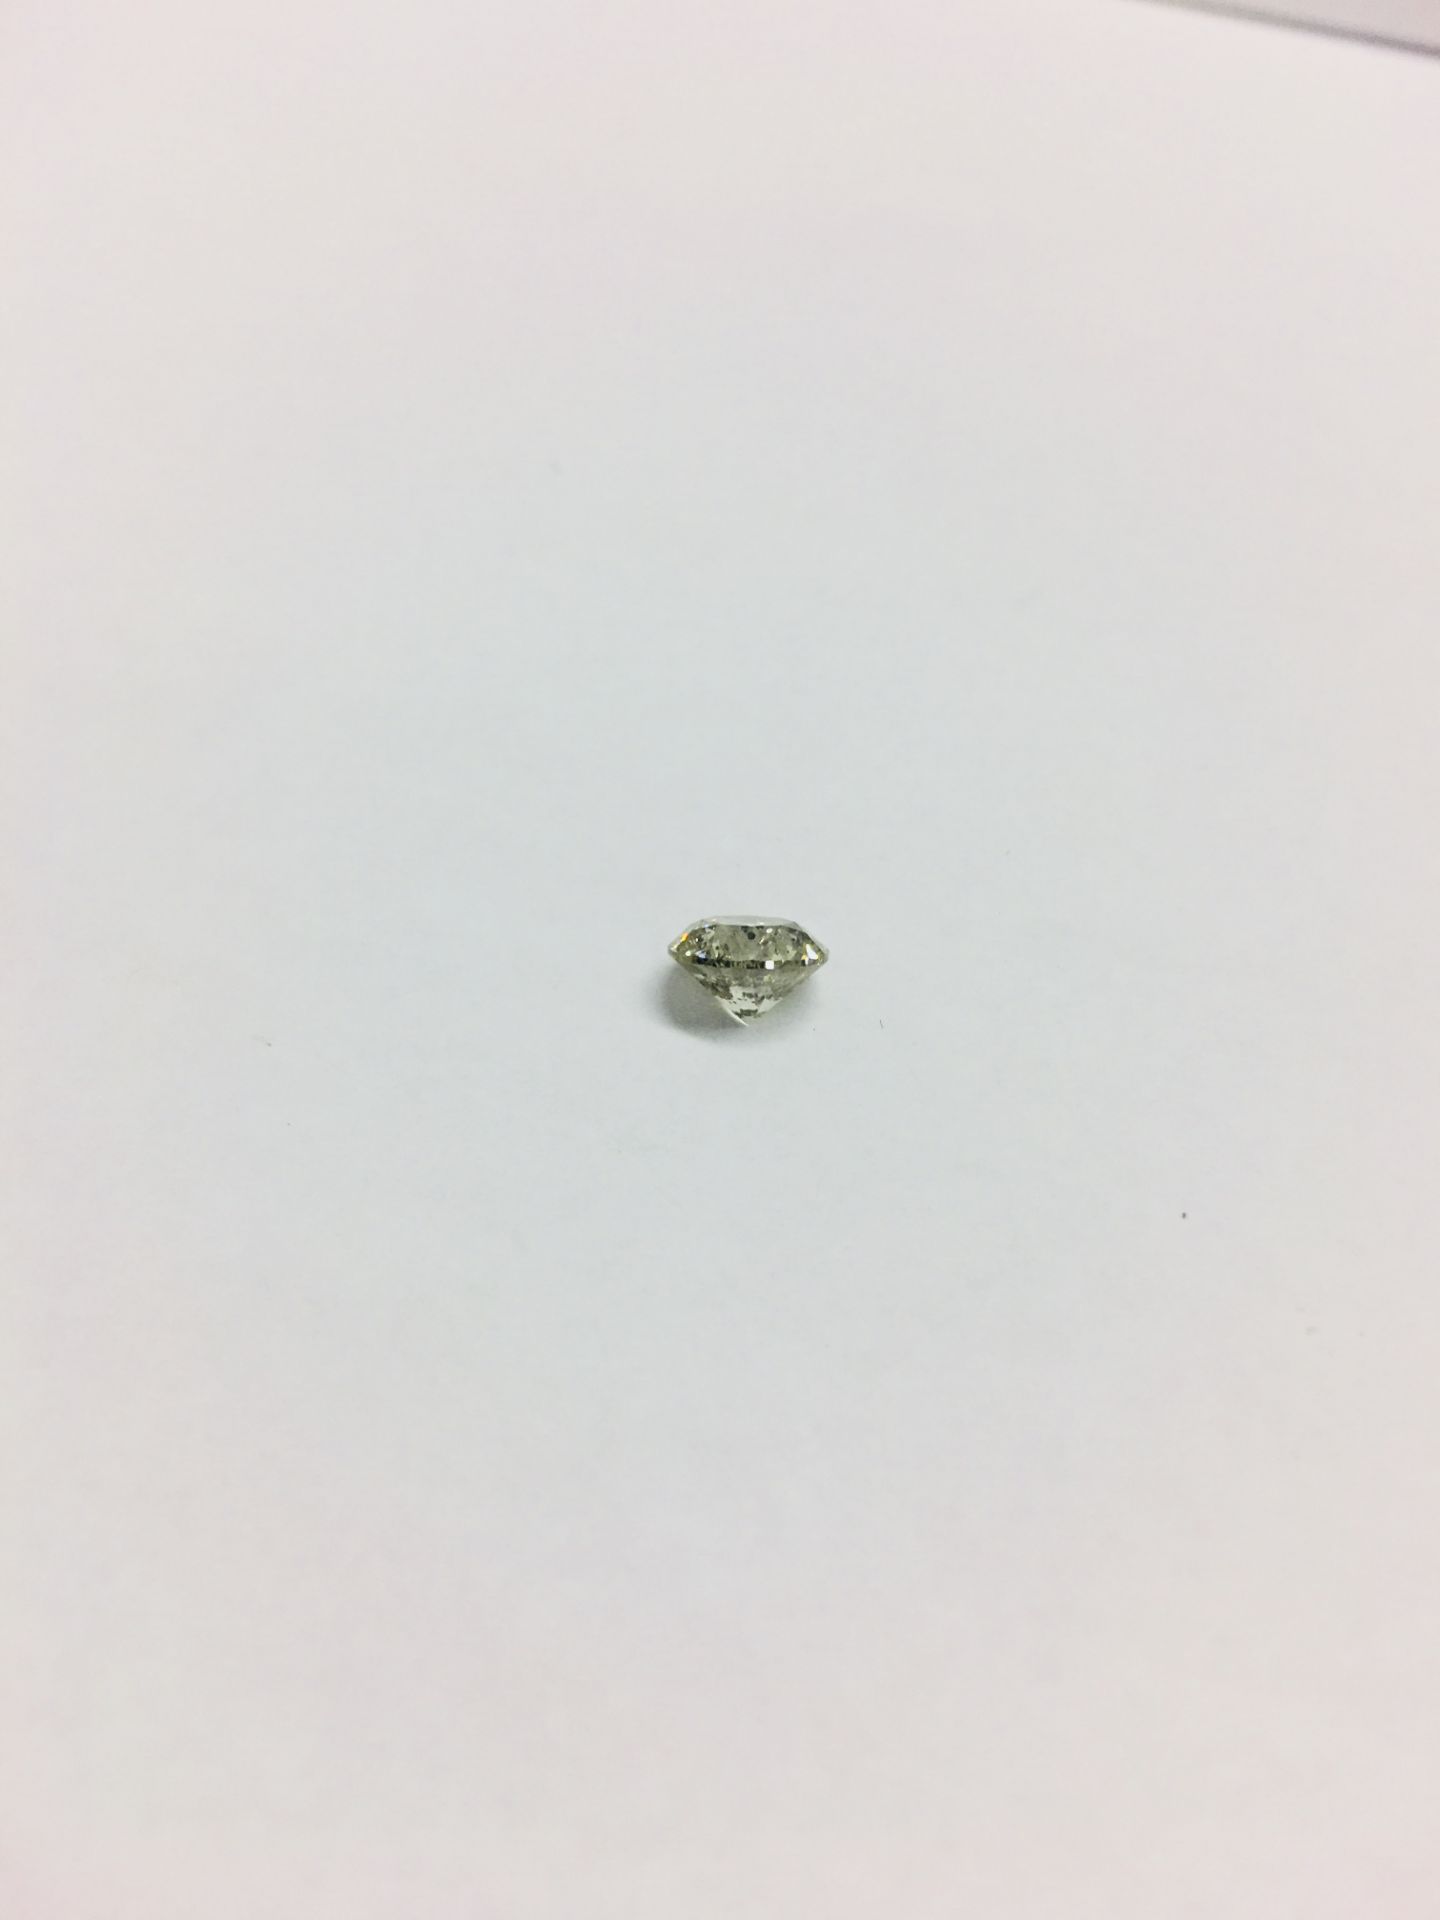 13ct Sapphire oval,16mmX14mm,natural sapphire ,treatment filled, - Image 3 of 5